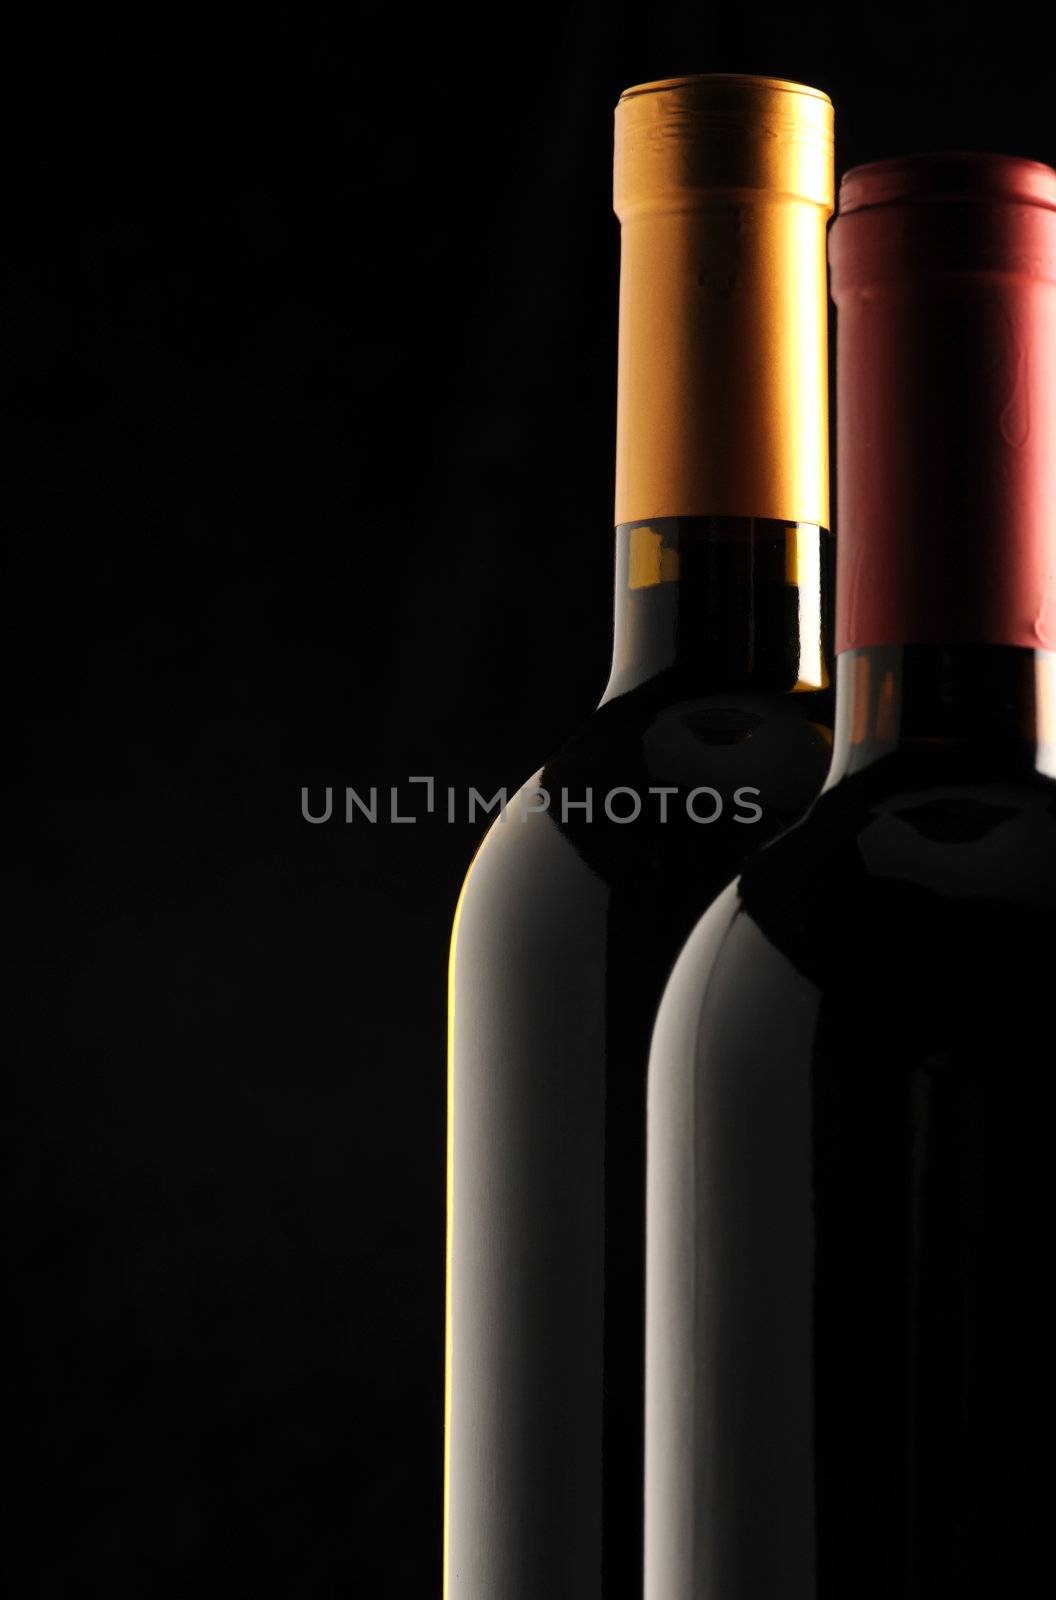 group of wine bottles by stokkete